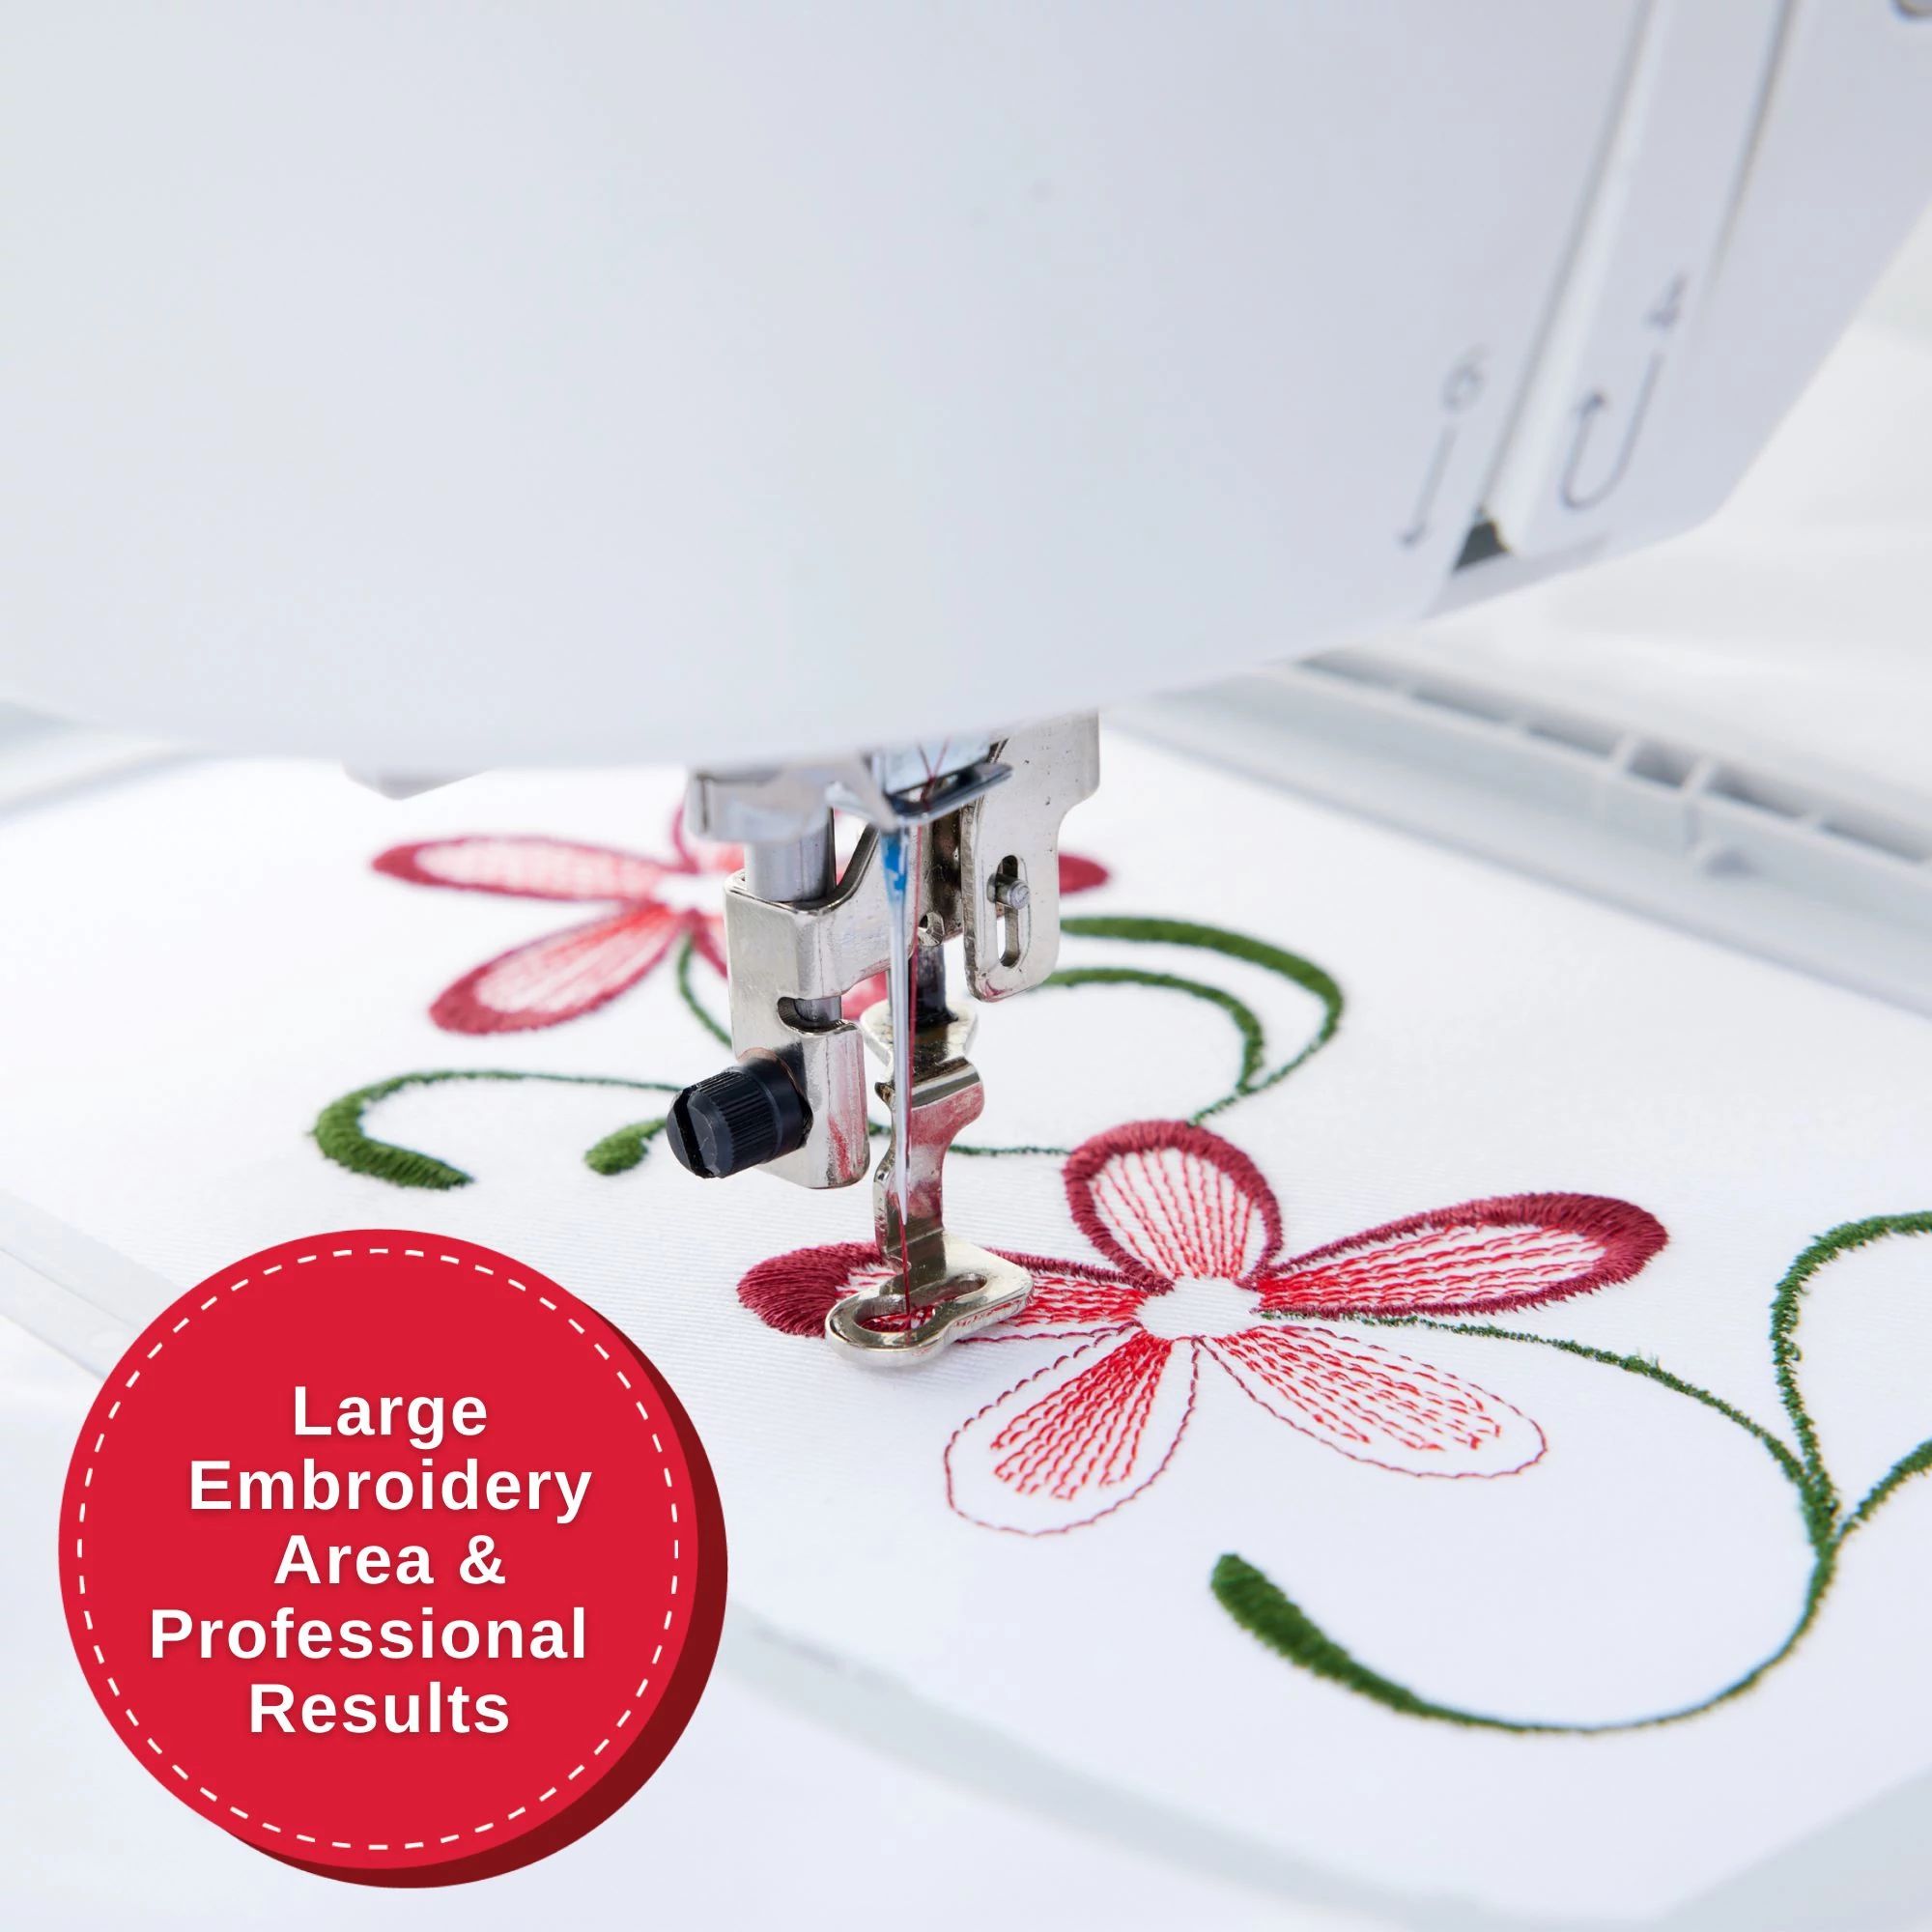 SE9180 Sewing and Embroidery Machine and Extension Table Bundle